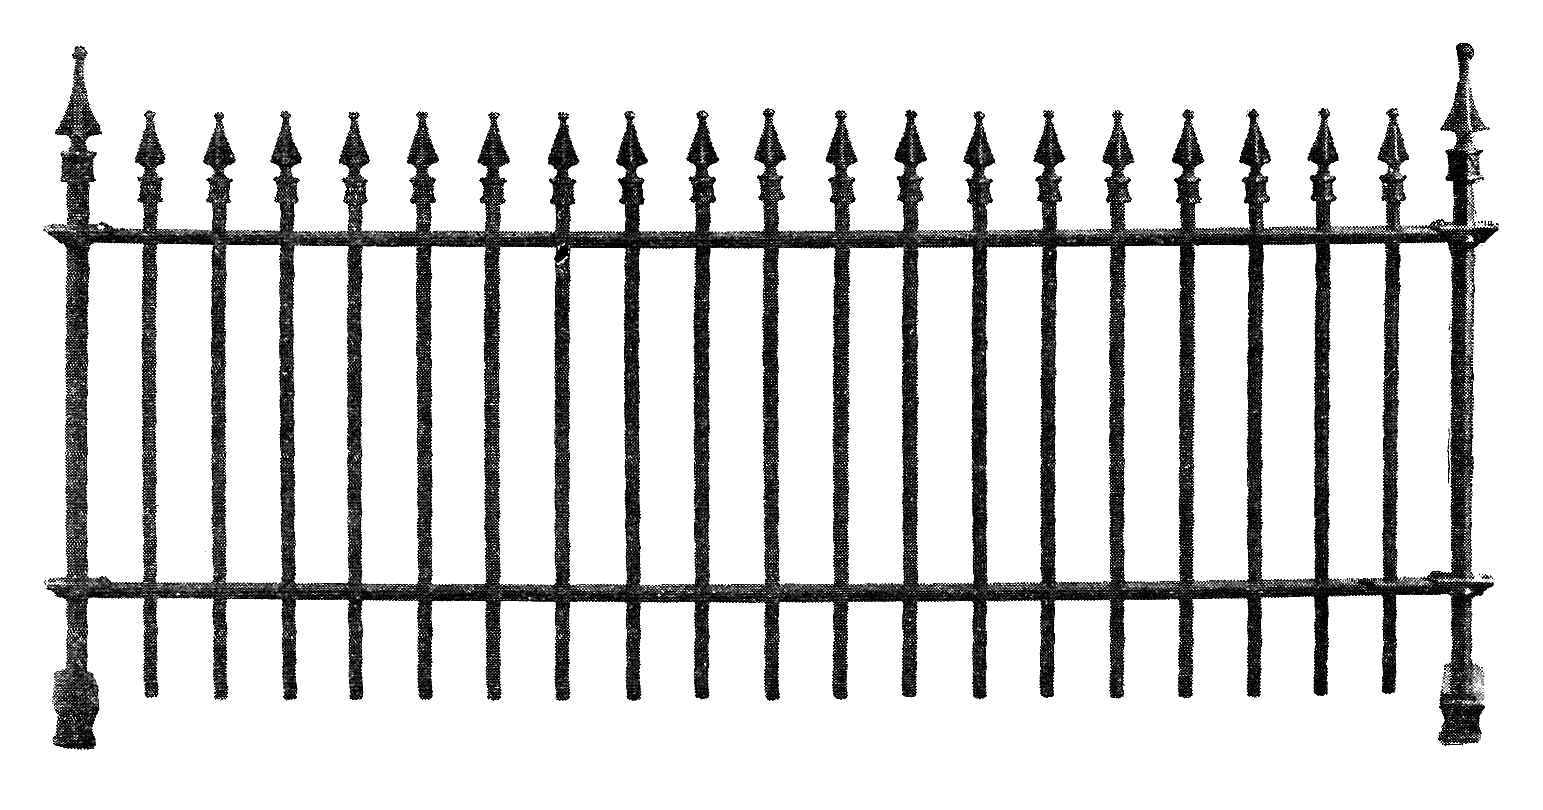 Clip art designs vector. Fence clipart painting fence